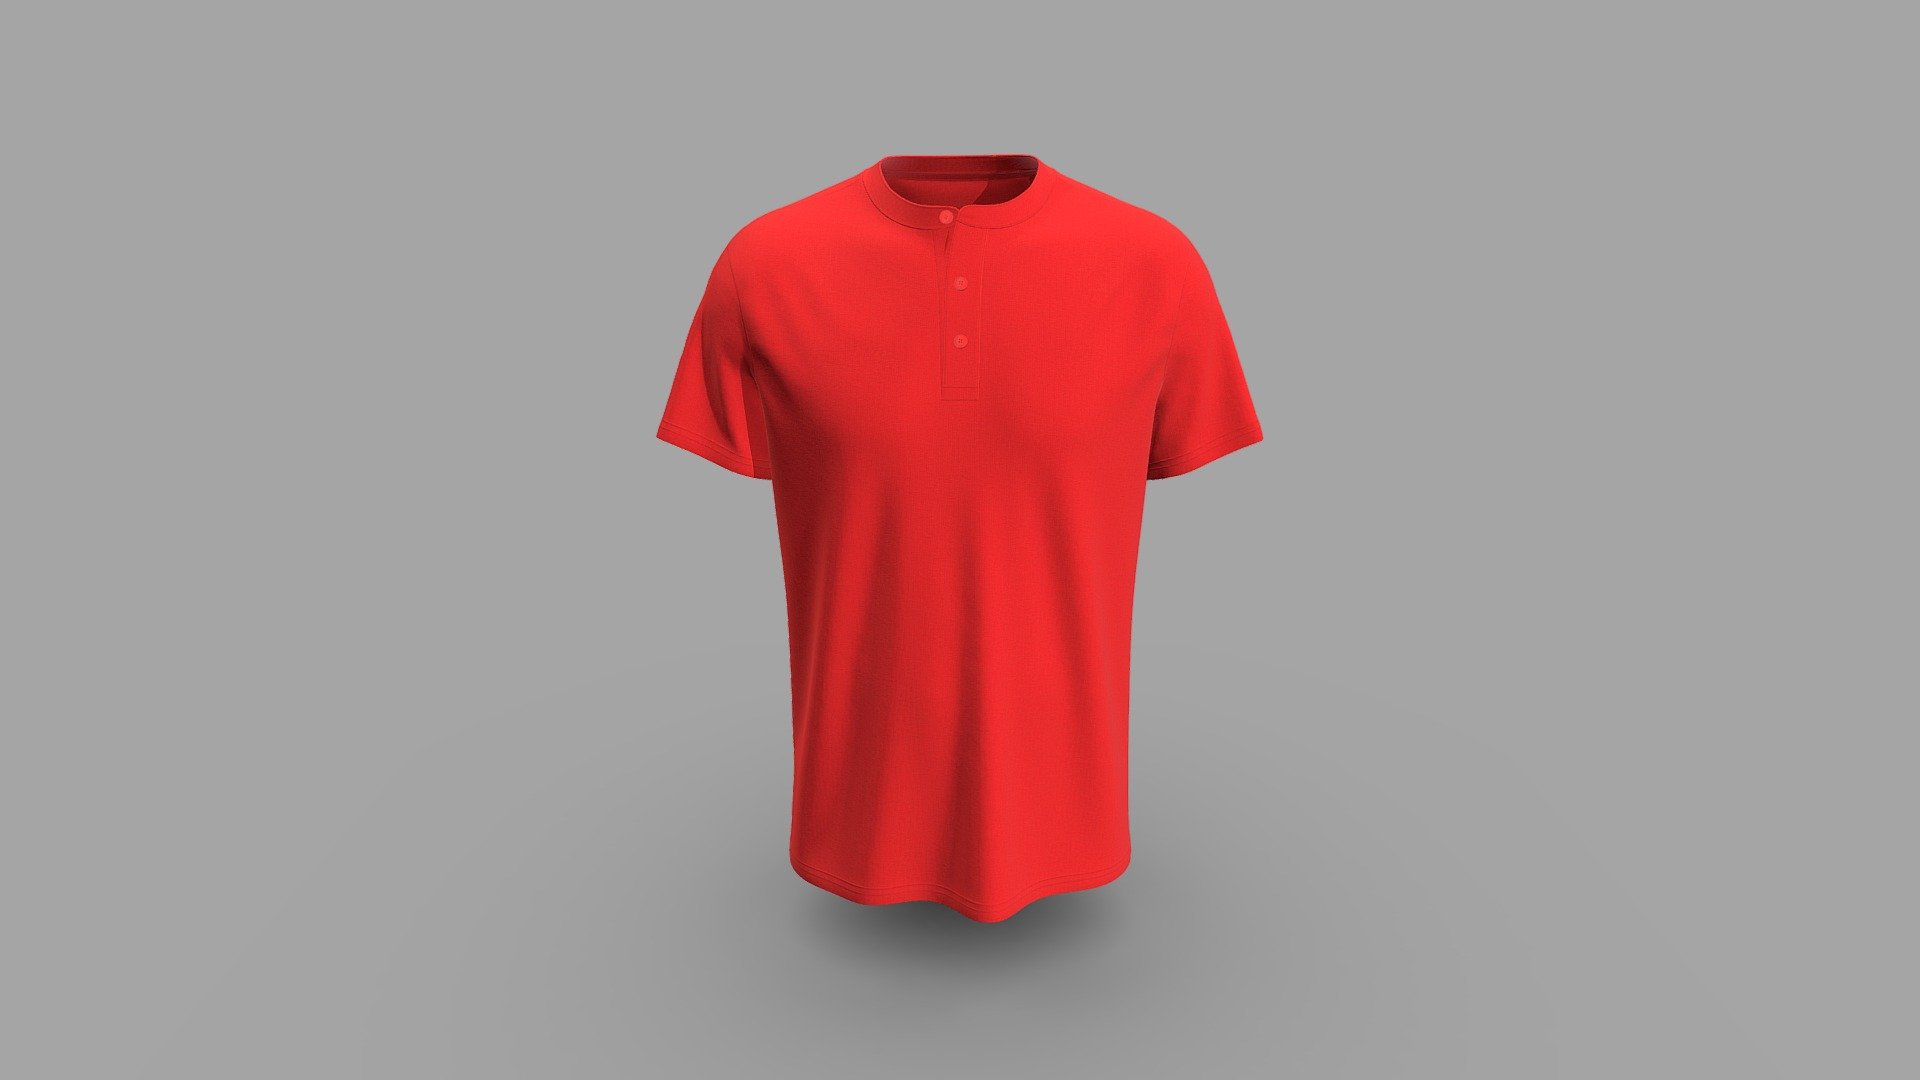 Cloth Title = Band Collar Mens Polo T-shirt 

SKU = DG100204 

Category = Men 

Product Type = Polo 

Cloth Length = Regular 

Body Fit = Regular Fit 

Occasion = Casual  

Sleeve Style = Set In Sleeve 


Our Services:

3D Apparel Design.

OBJ,FBX,GLTF Making with High/Low Poly.

Fabric Digitalization.

Mockup making.

3D Teck Pack.

Pattern Making.

2D Illustration.

Cloth Animation and 360 Spin Video.


Contact us:- 

Email: info@digitalfashionwear.com 

Website: https://digitalfashionwear.com 


We designed all the types of cloth specially focused on product visualization, e-commerce, fitting, and production. 

We will design: 

T-shirts 

Polo shirts 

Hoodies 

Sweatshirt 

Jackets 

Shirts 

TankTops 

Trousers 

Bras 

Underwear 

Blazer 

Aprons 

Leggings 

and All Fashion items. 





Our goal is to make sure what we provide you, meets your demand 3d model